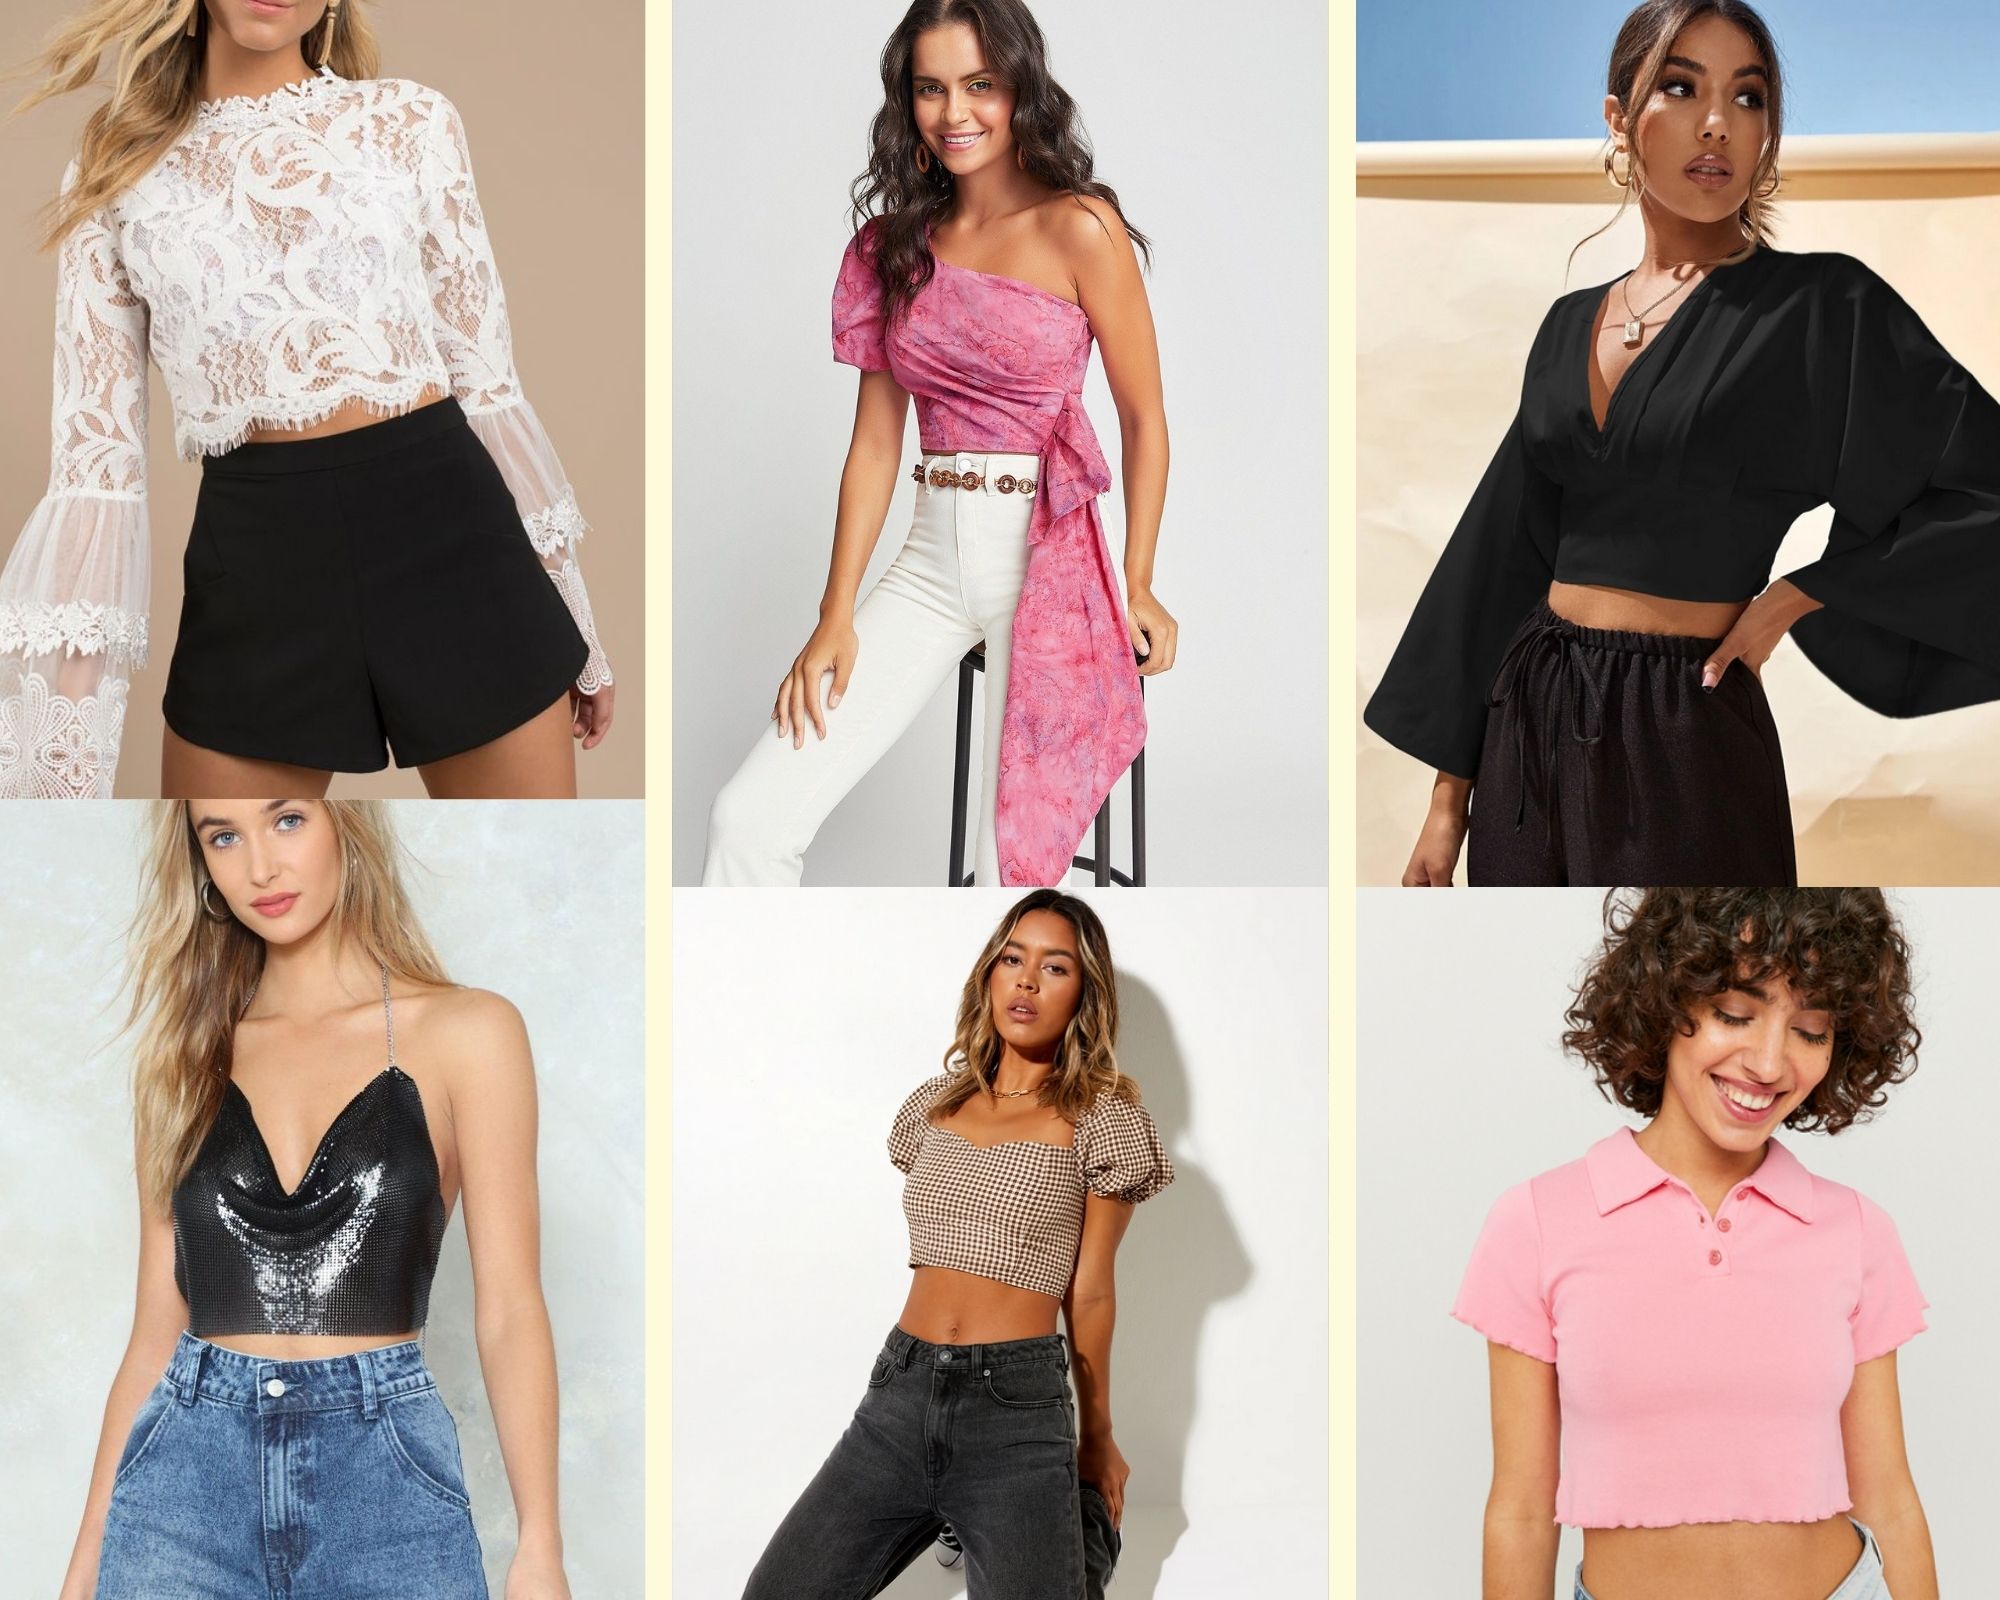 How To Make Different Types Of Crop Tops? – solowomen